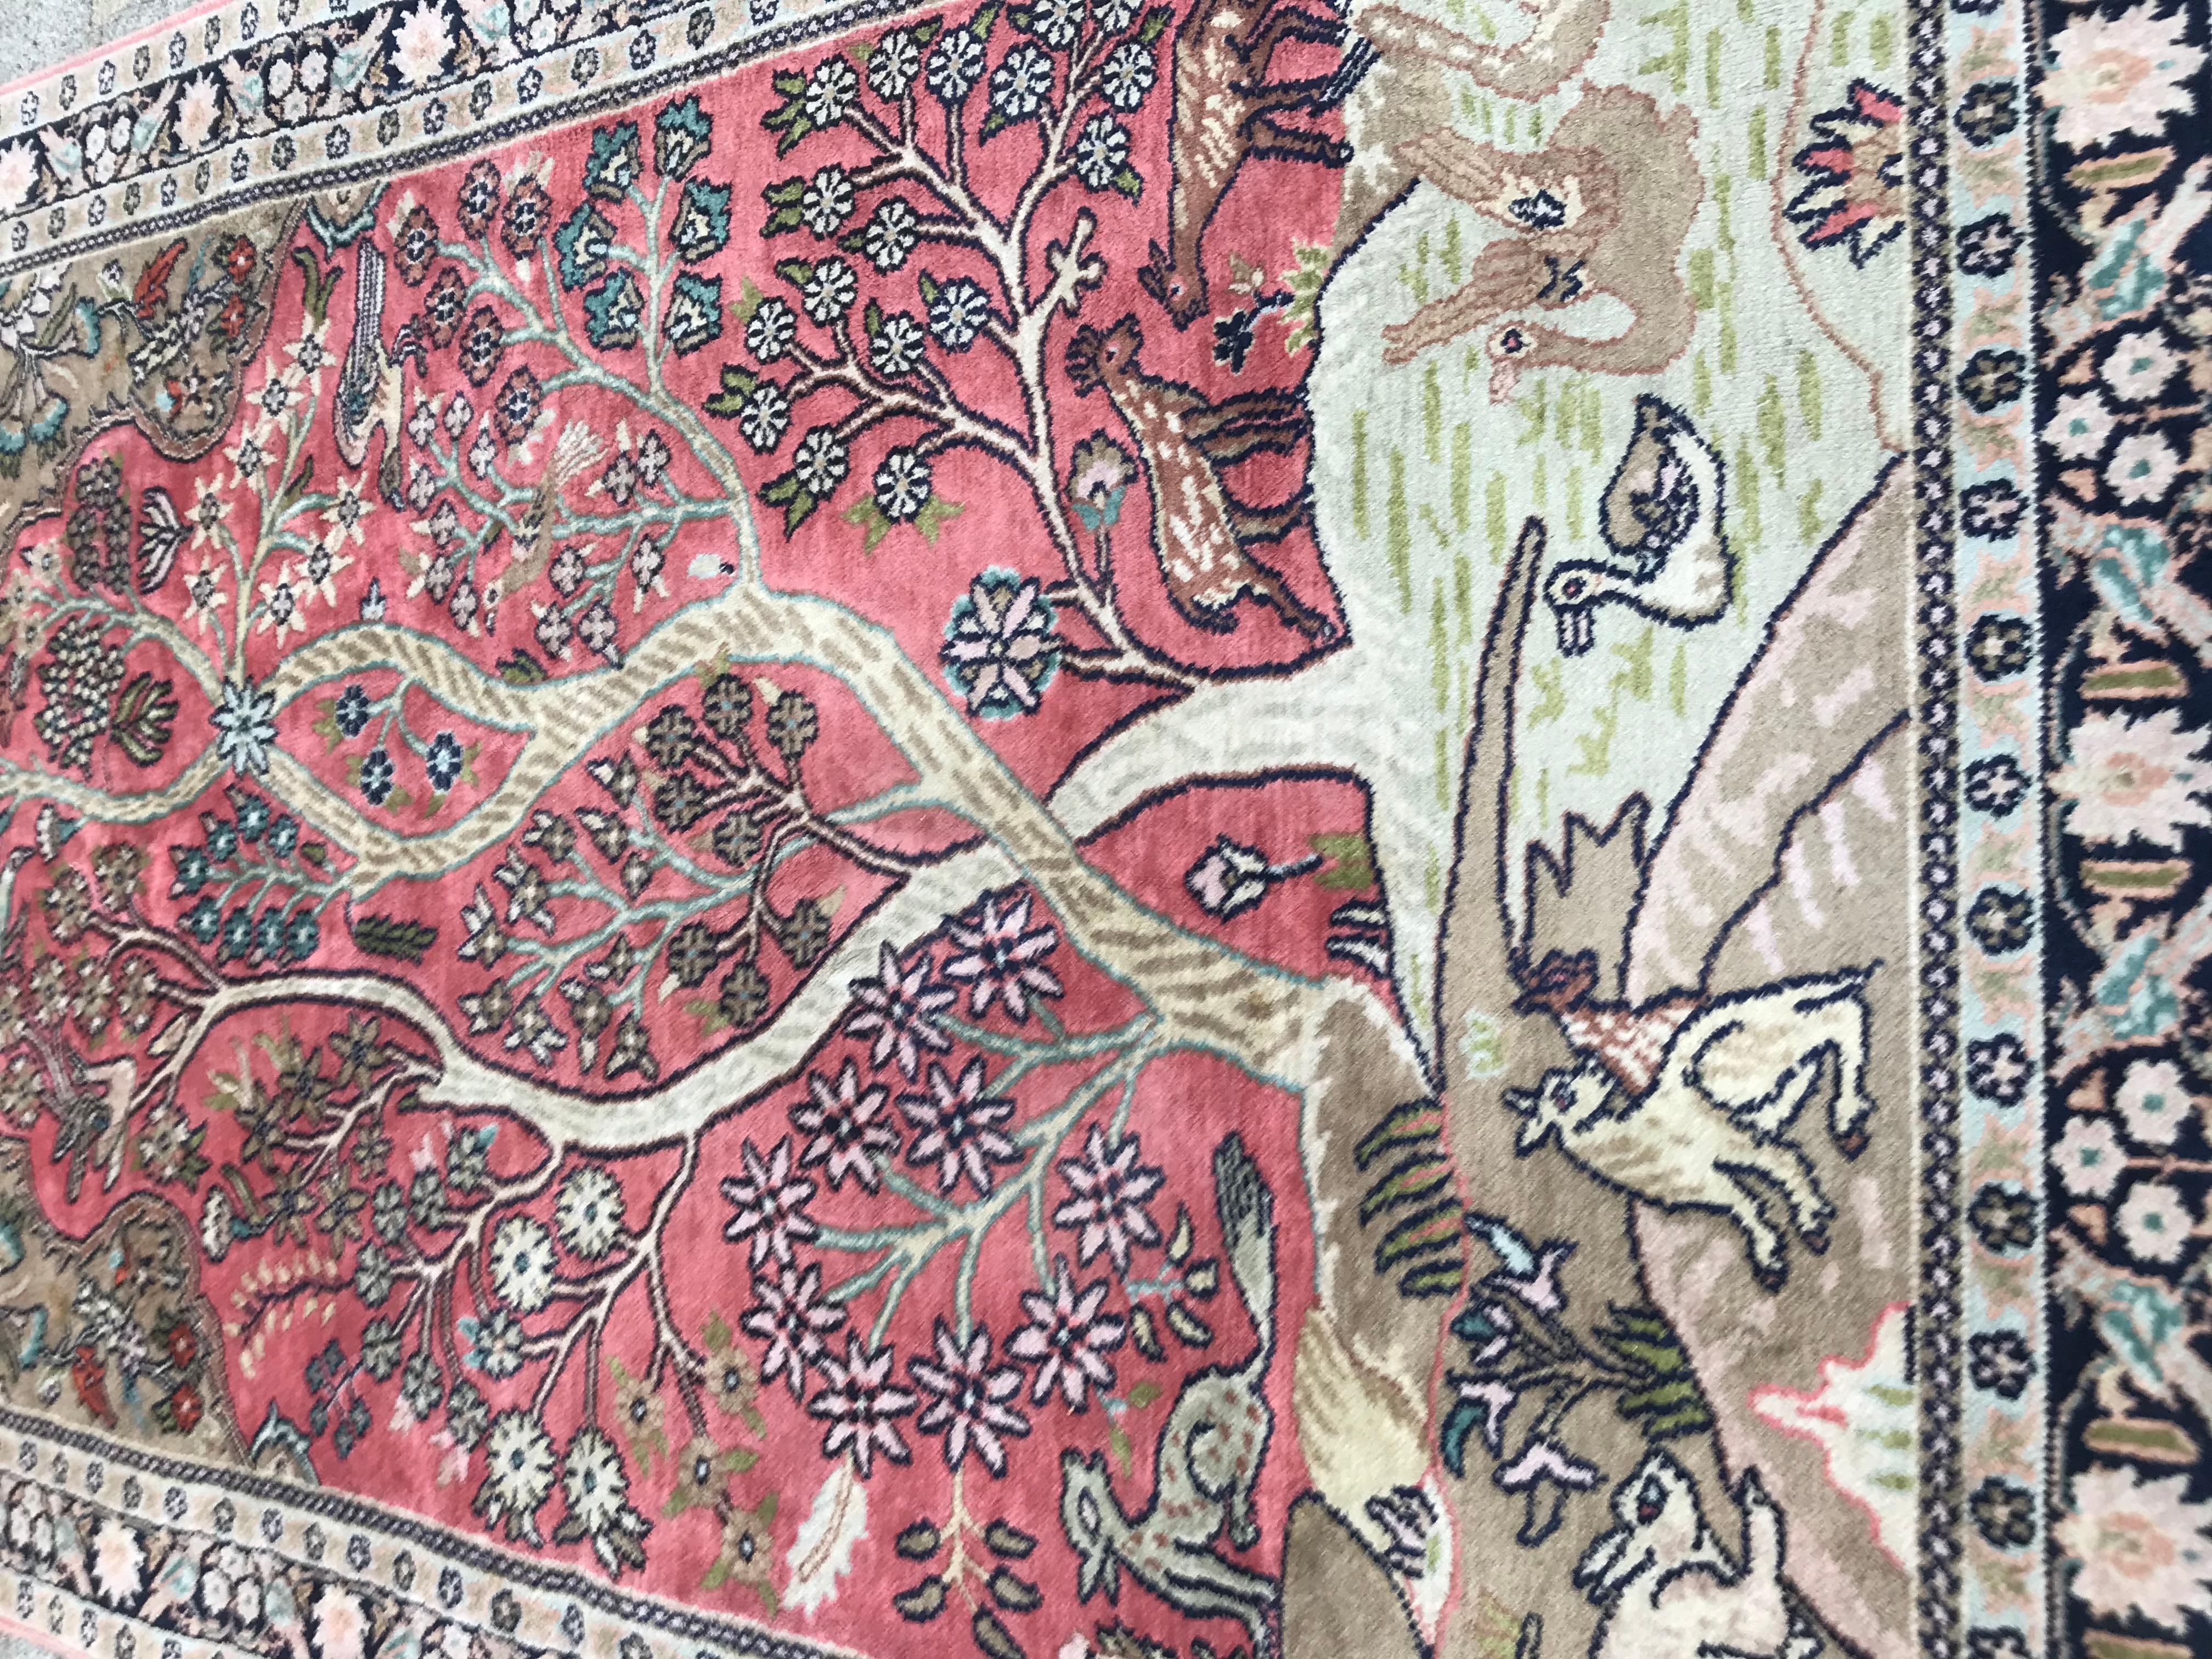 A beautiful 20th century silk Kashmir rug, with a garden design entirely hand knotted with silk velvet on cotton foundation. Size: 3.01 x 5.08 feet.